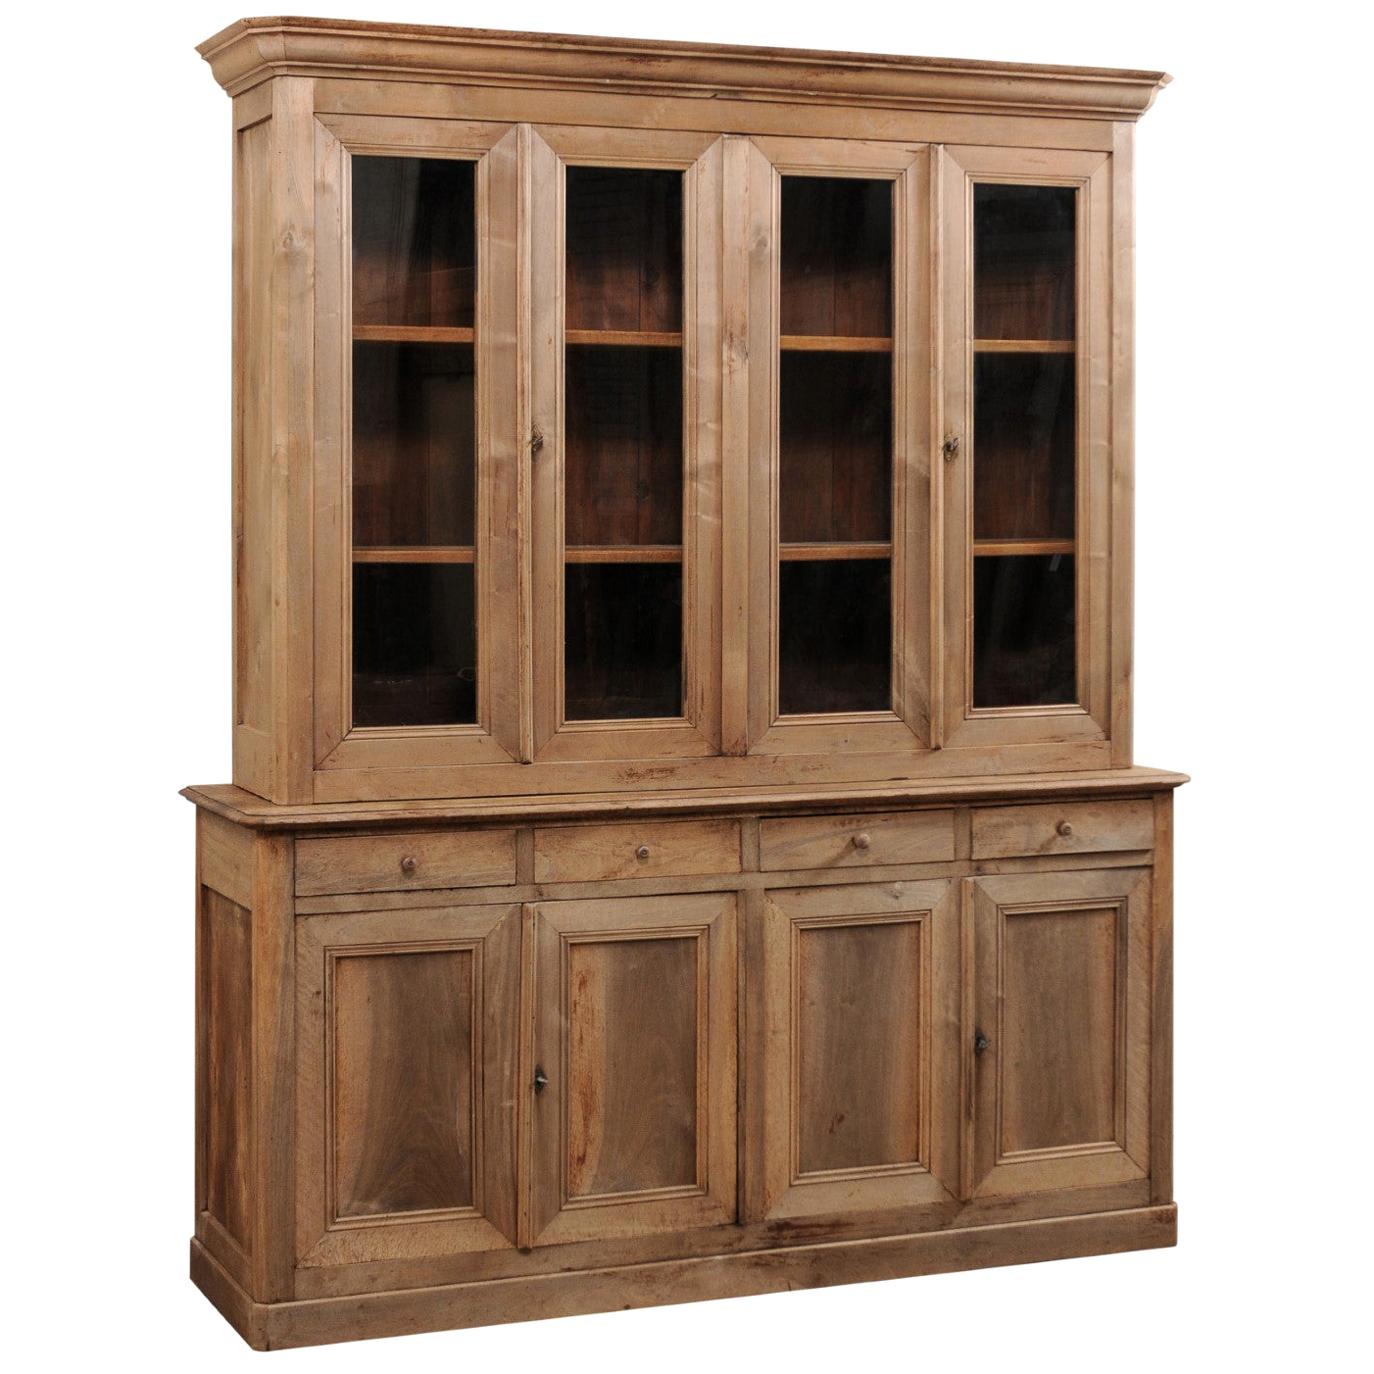 French 19th Century Tall Cabinet w/ Glass Display Top over Closed Storage Below